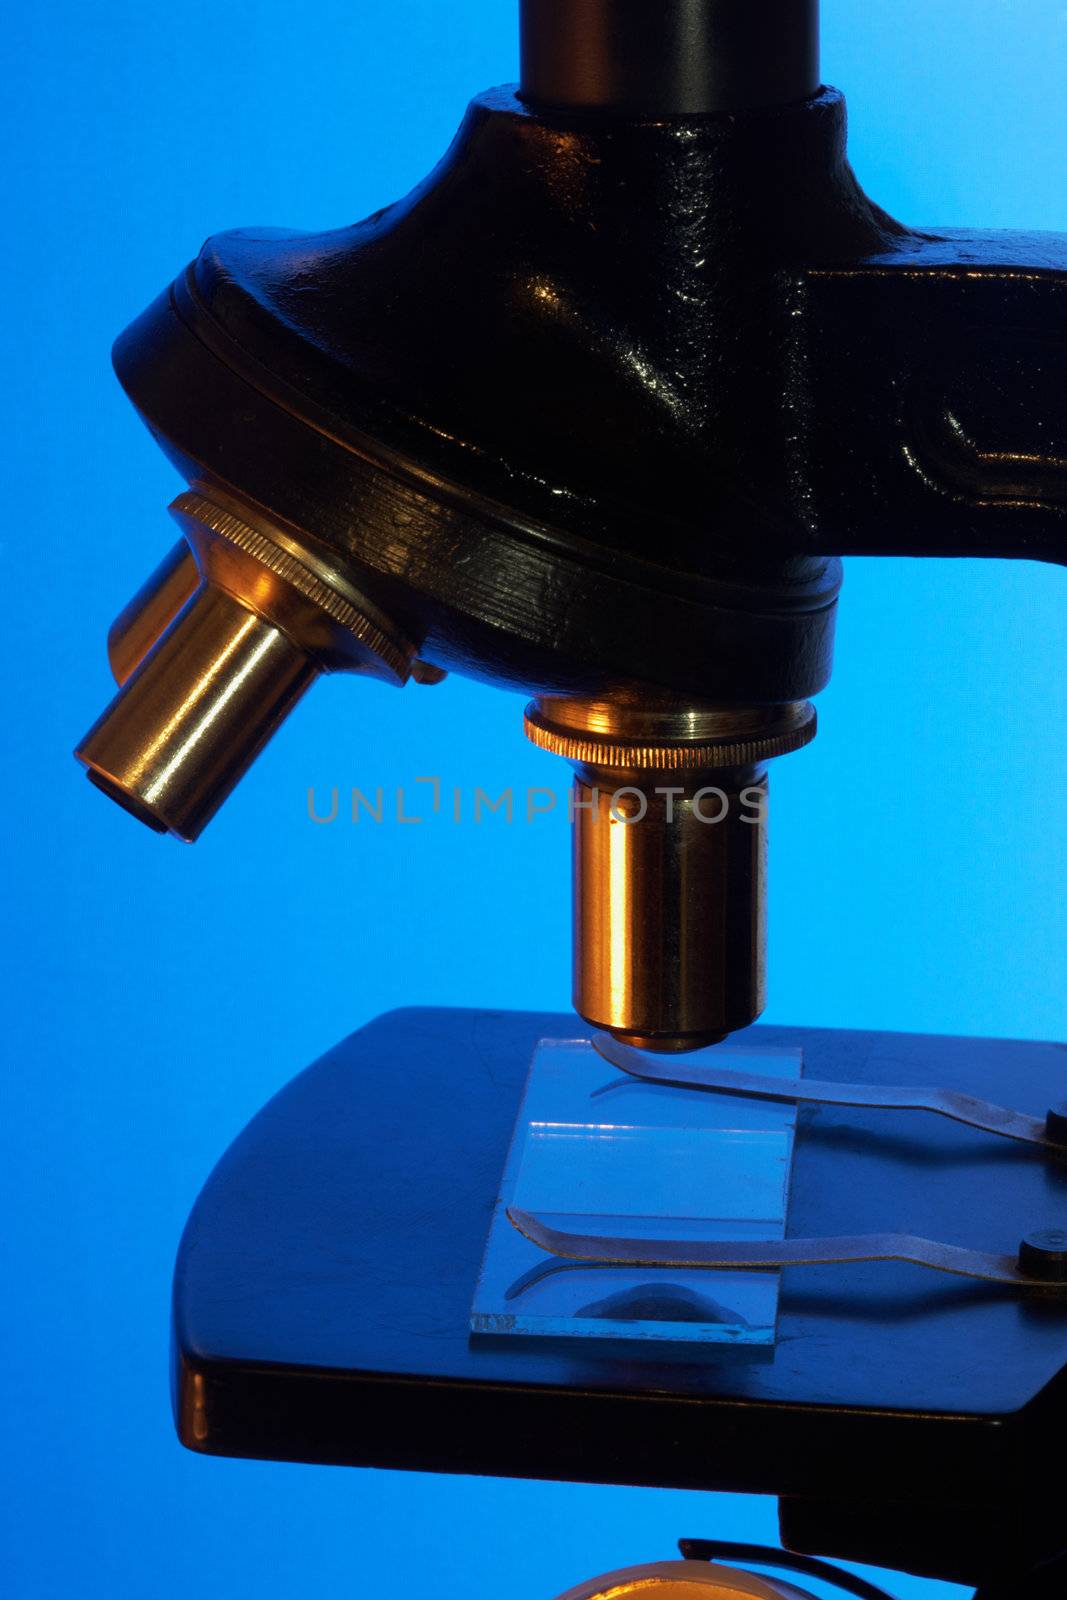 Microscope for the analysis on a blue background